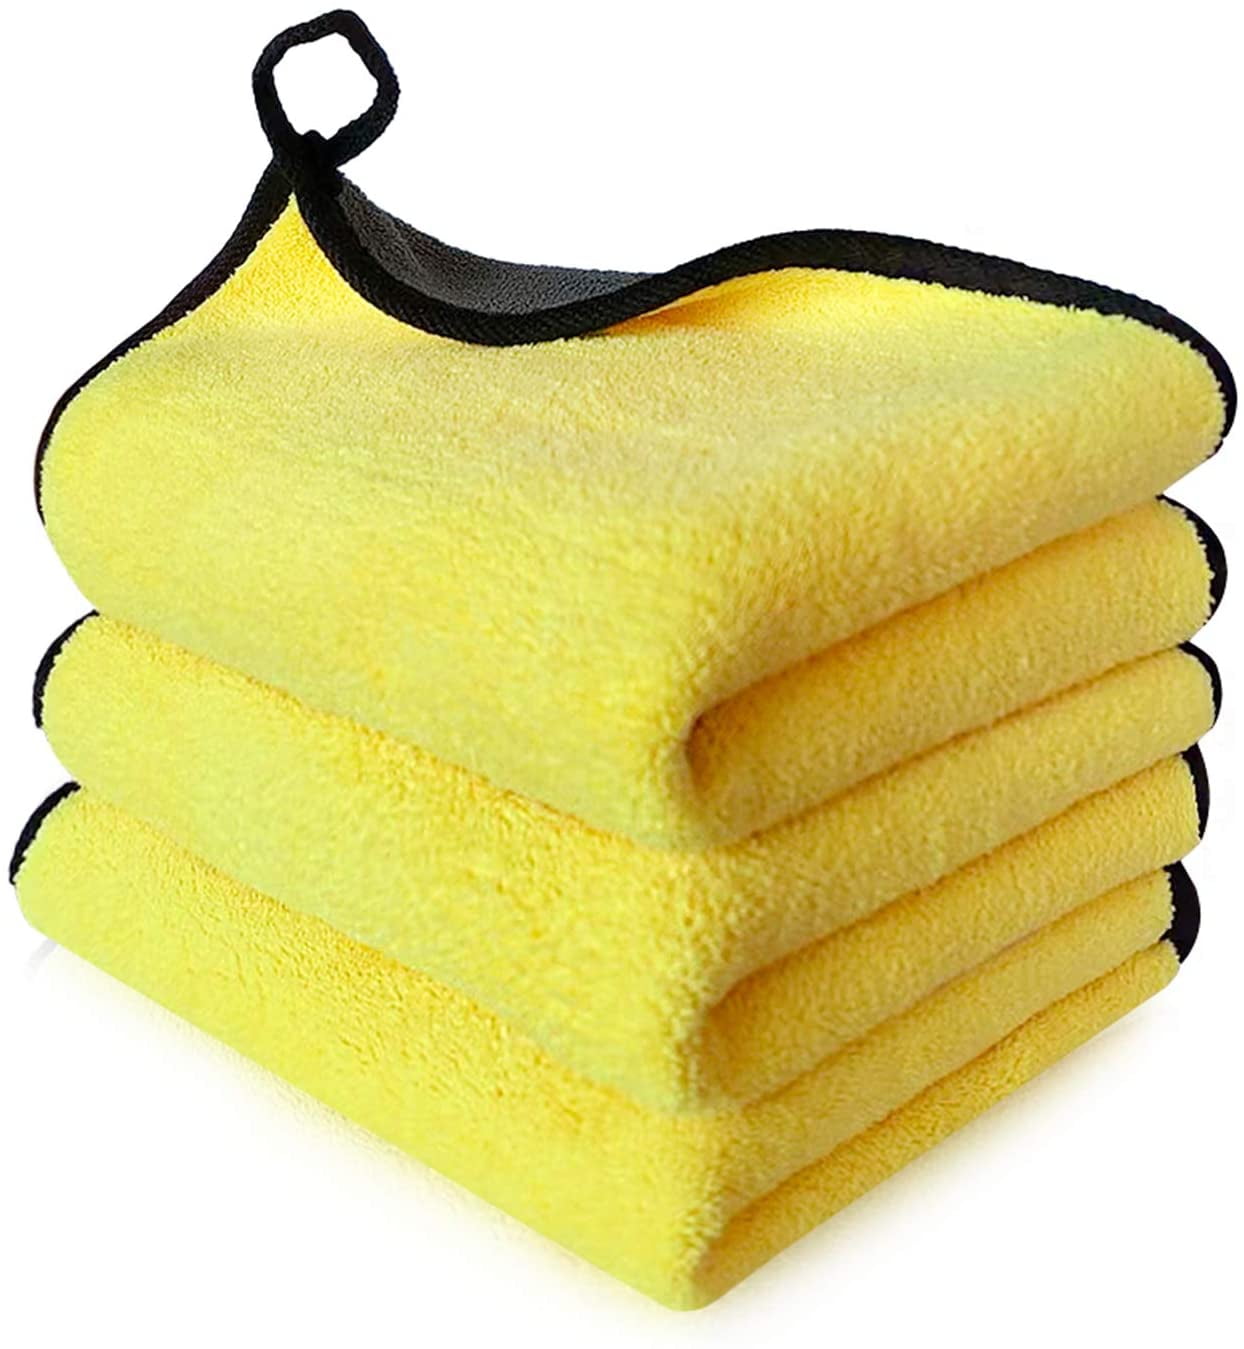 CLEANING DETAILING POLISHING RAG CAR 3 BLUE YELLOW RED MICROFIBER TOWELS CLOTH 